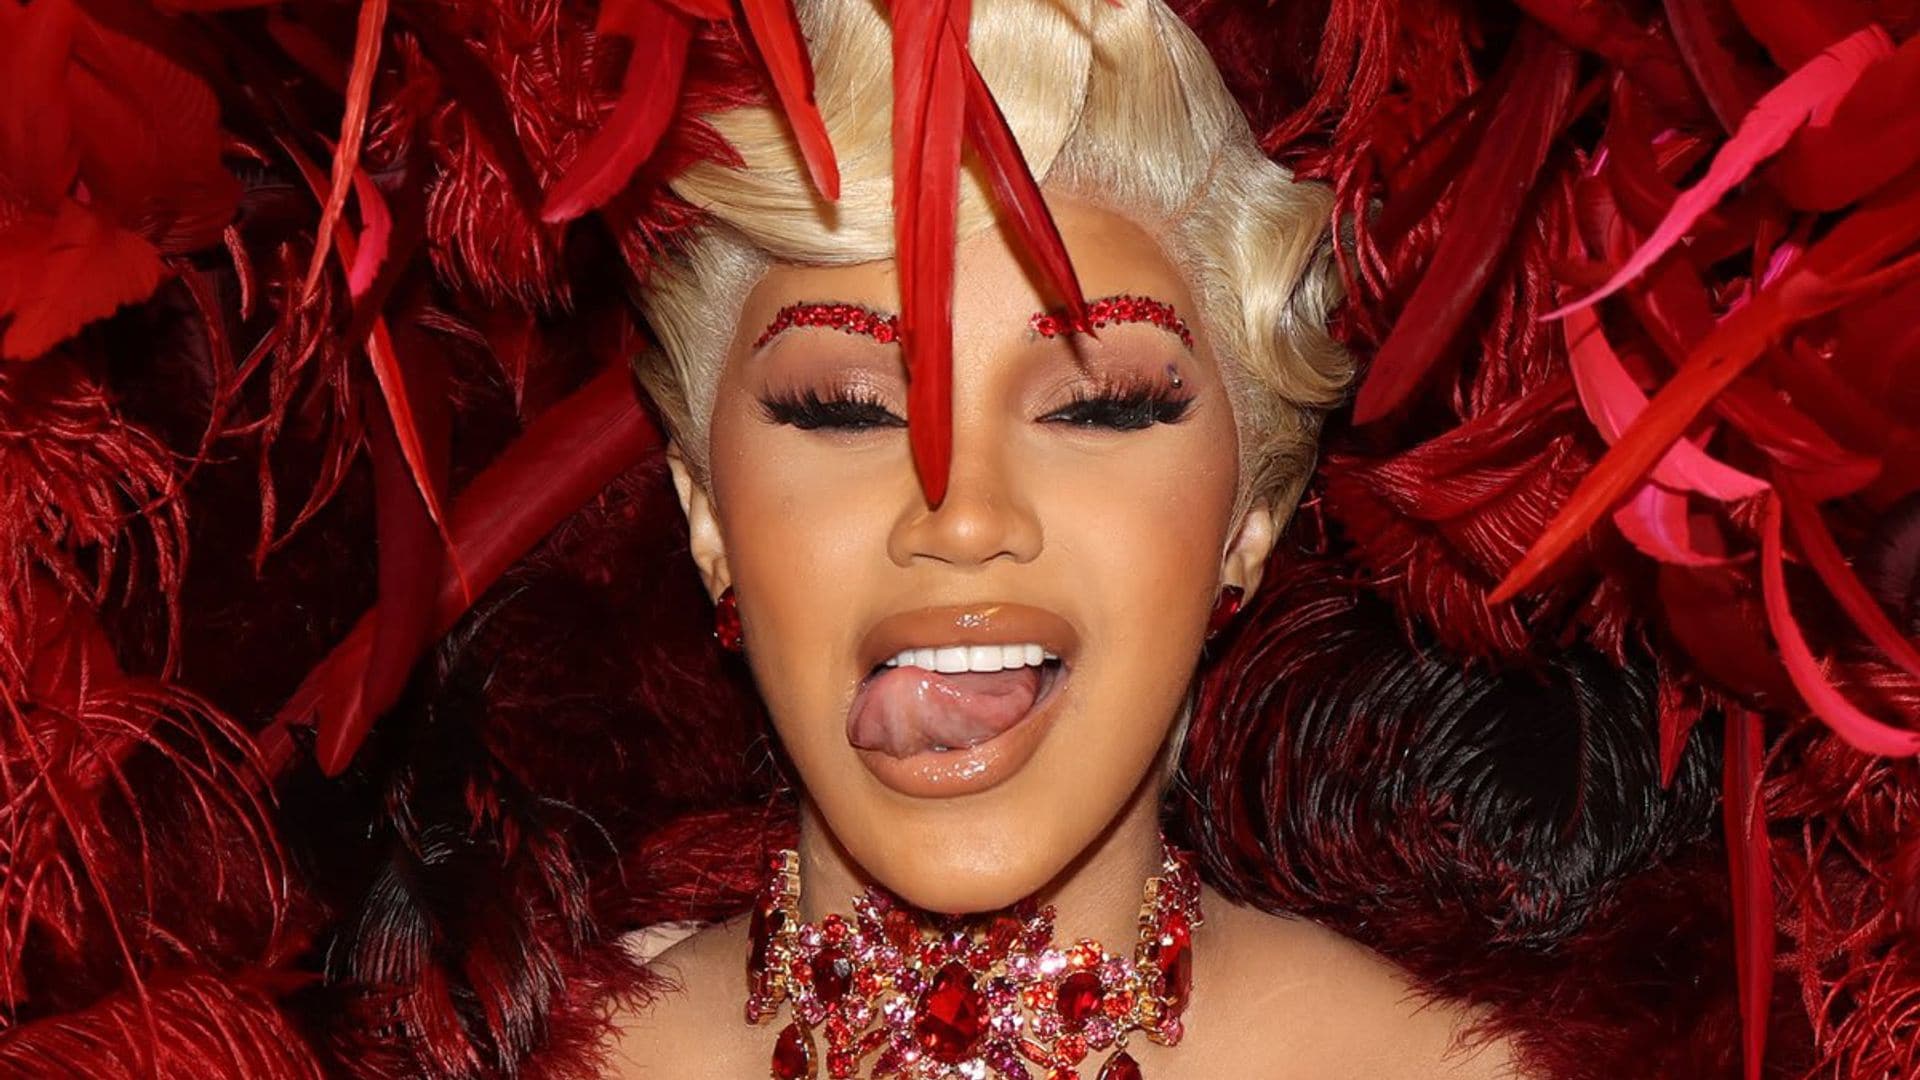 Cardi B looks stunning in her first public appearance after giving birth